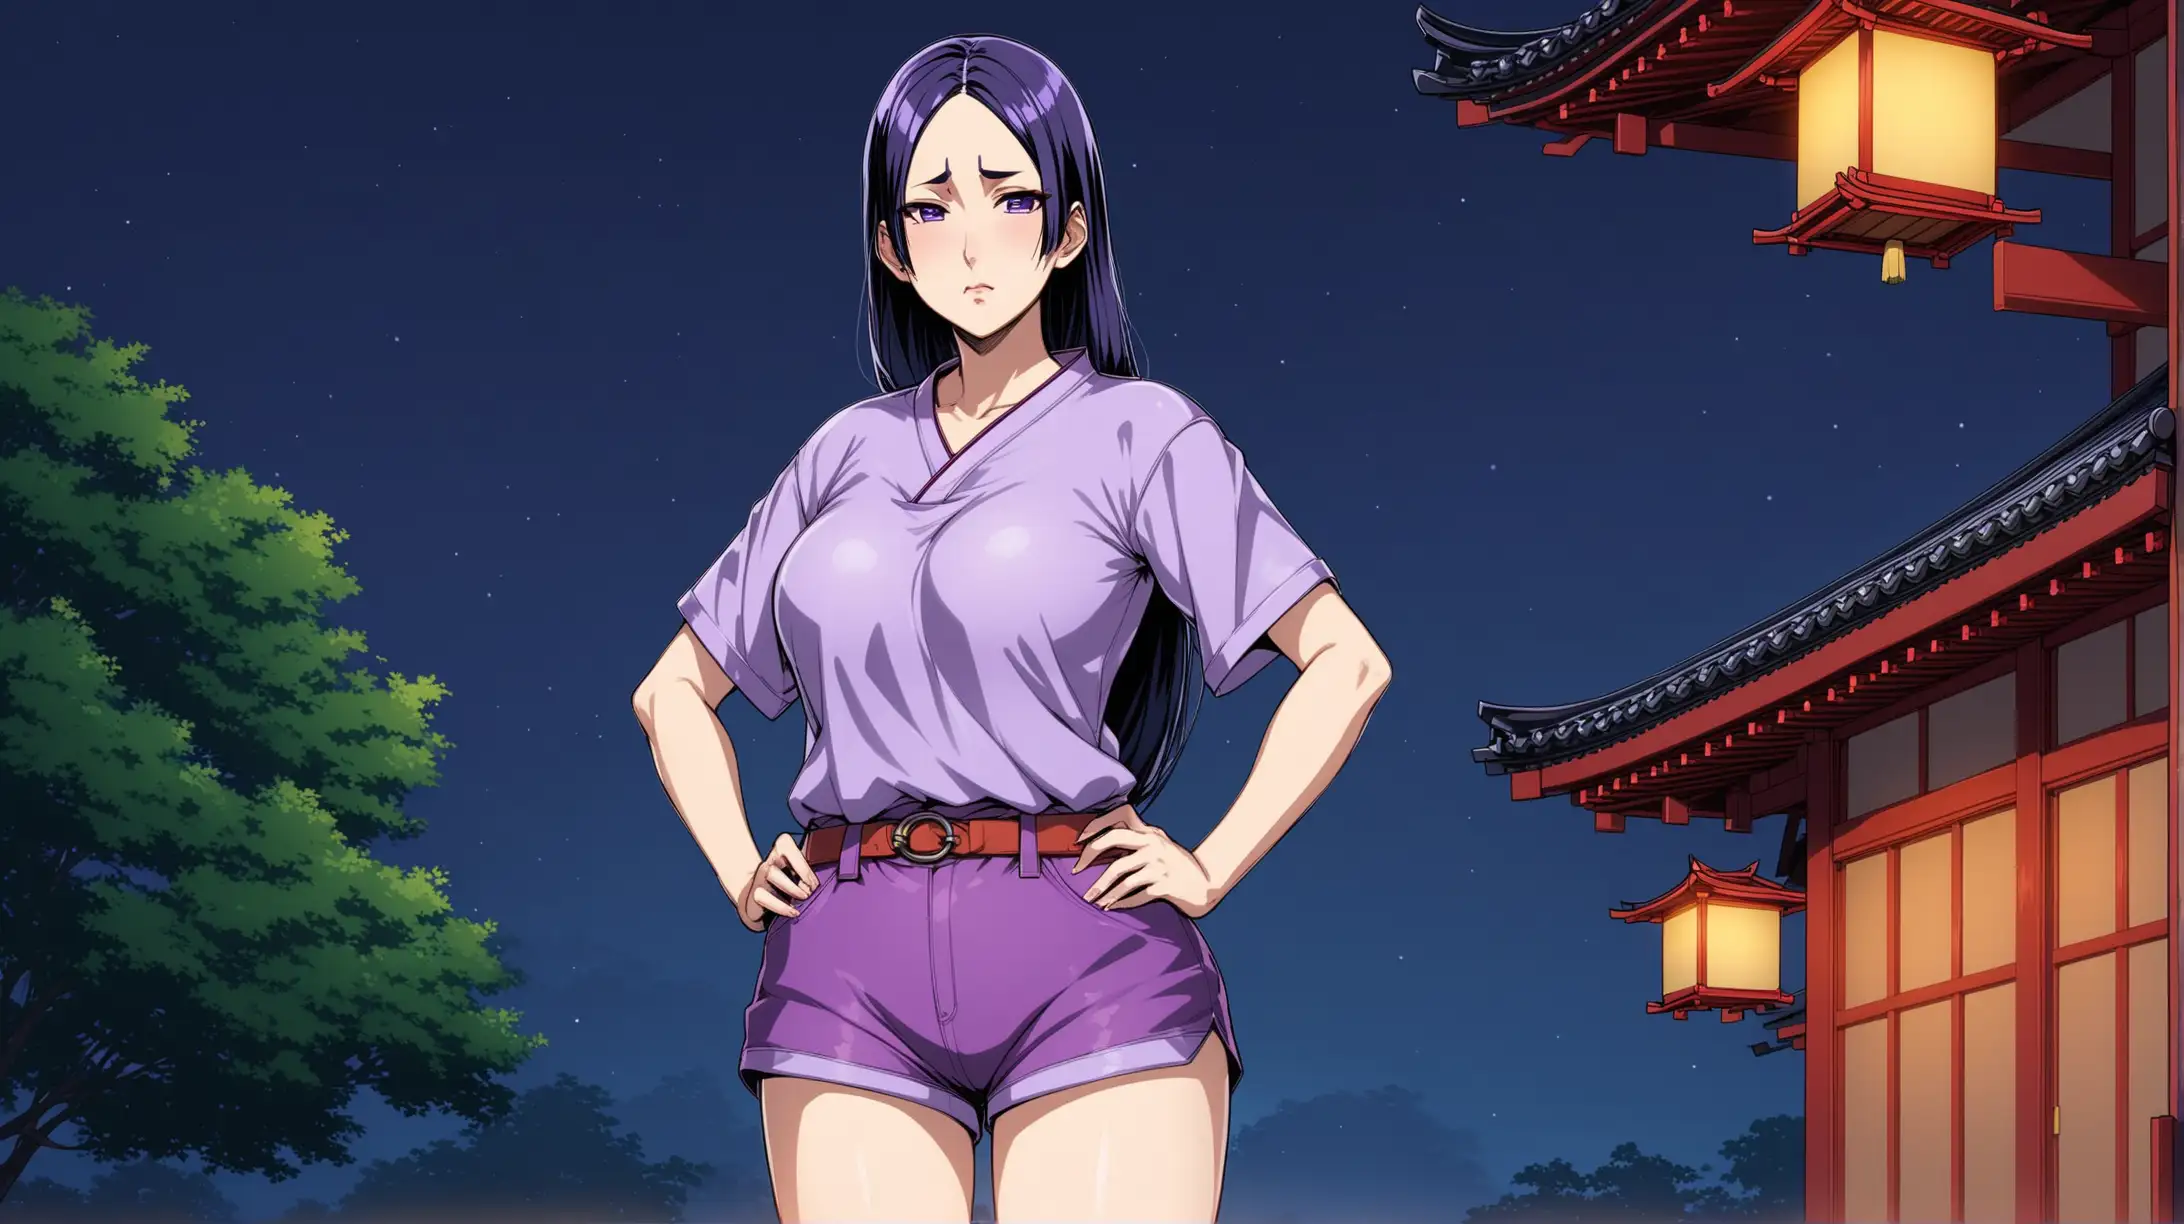 Draw the character Minamoto no Raikou, high quality, standing outside in the evening, with her hands on her hips, wearing shorts and a shirt, making a pouty face at the viewer